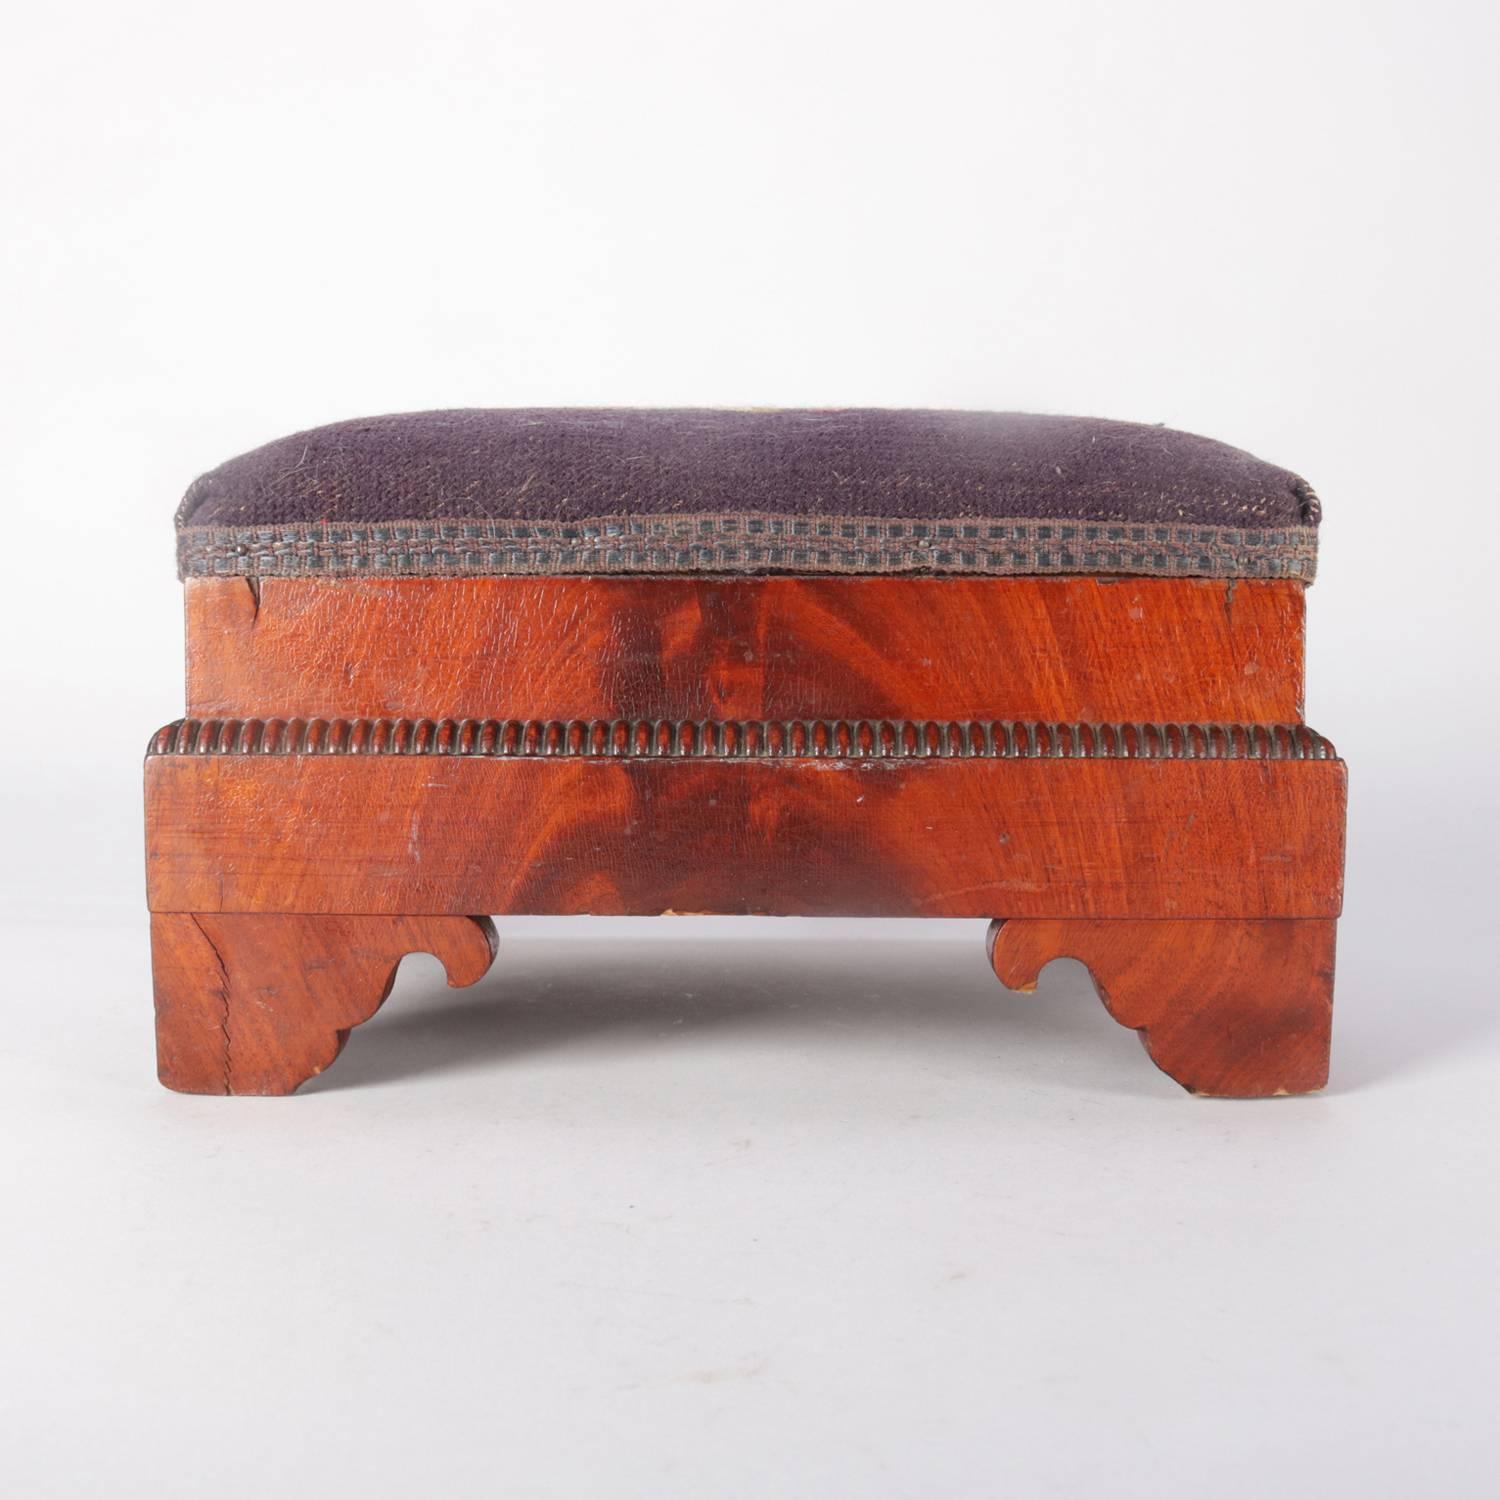 Antique American Empire Flame Mahogany Floral Needlepoint Foot Stool, circa 1850 3